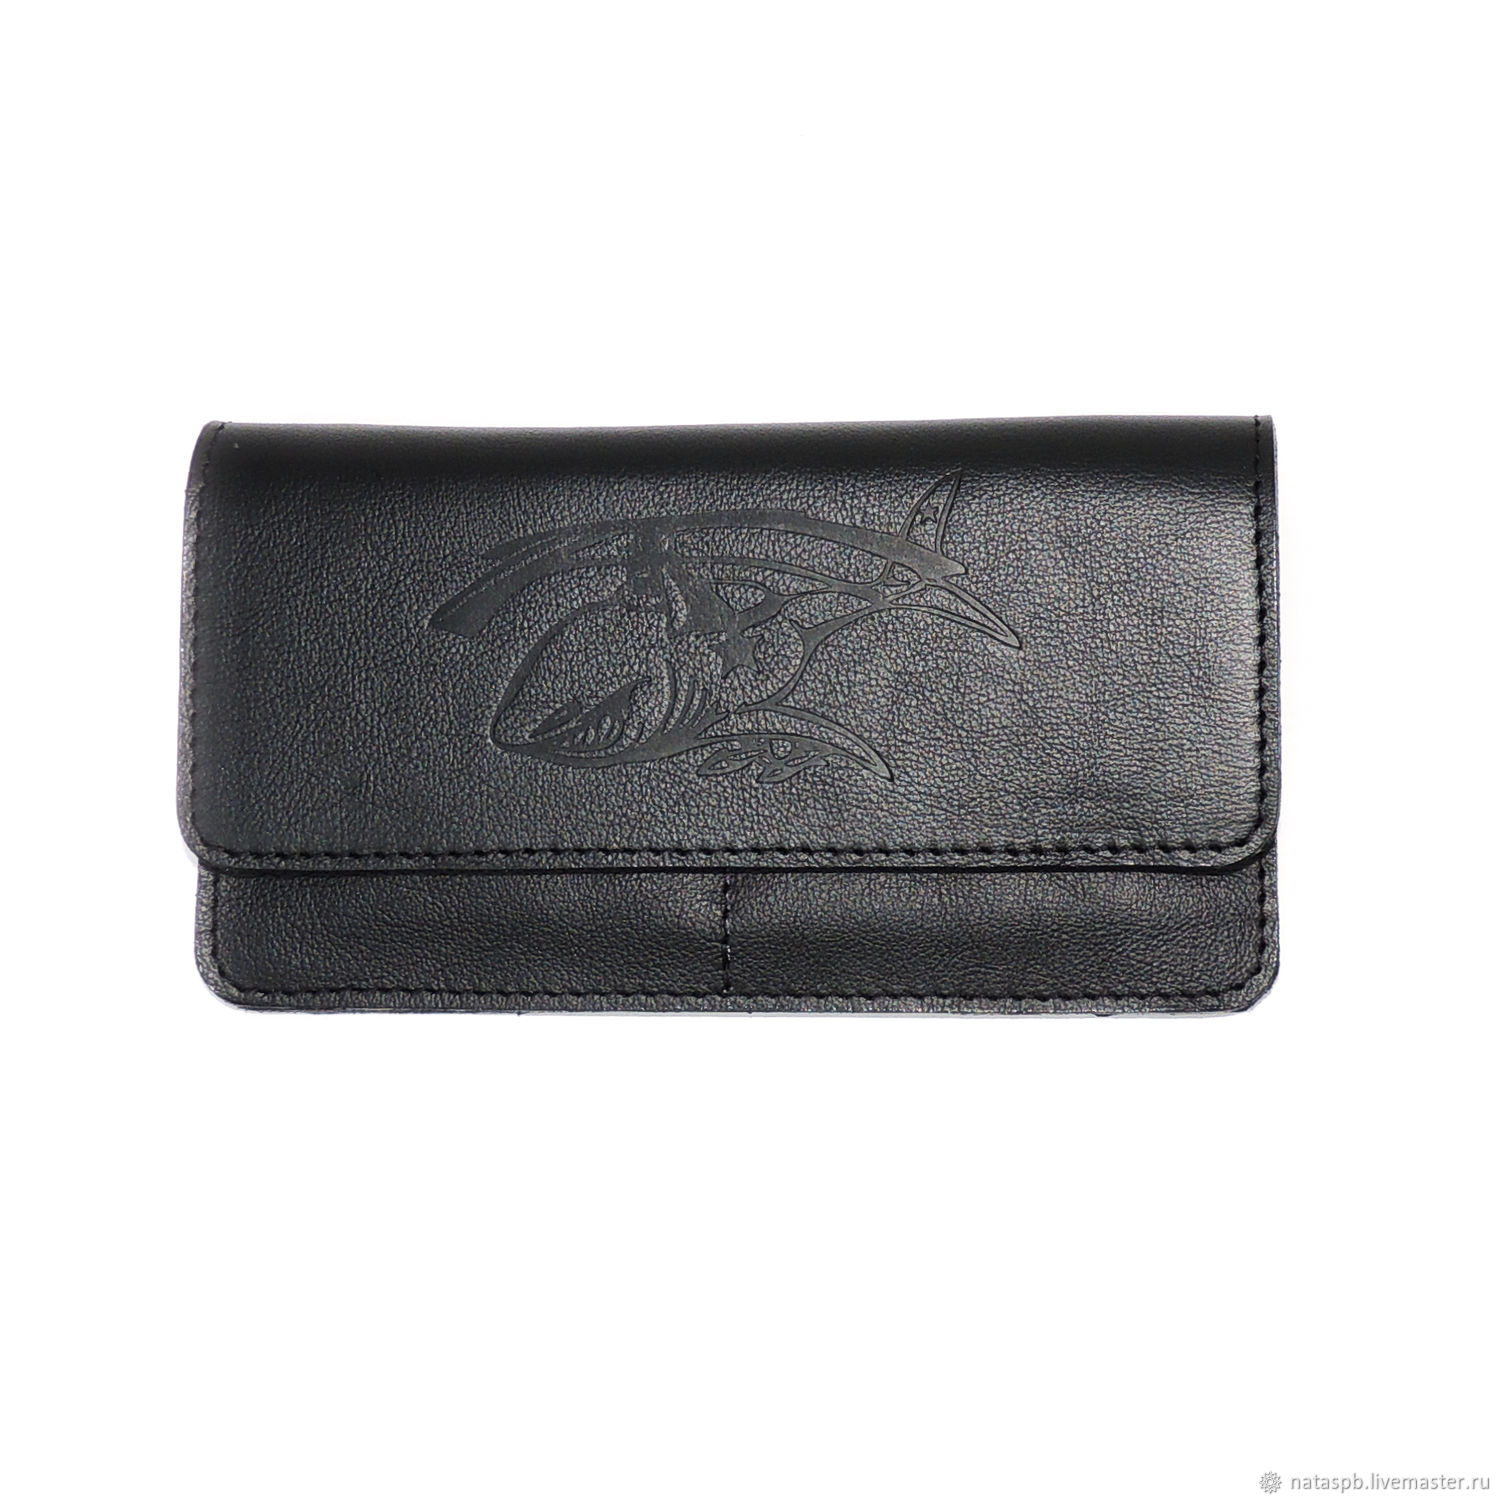 Men's leather wallet black, blue with helicopter, Wallets, St. Petersburg,  Фото №1